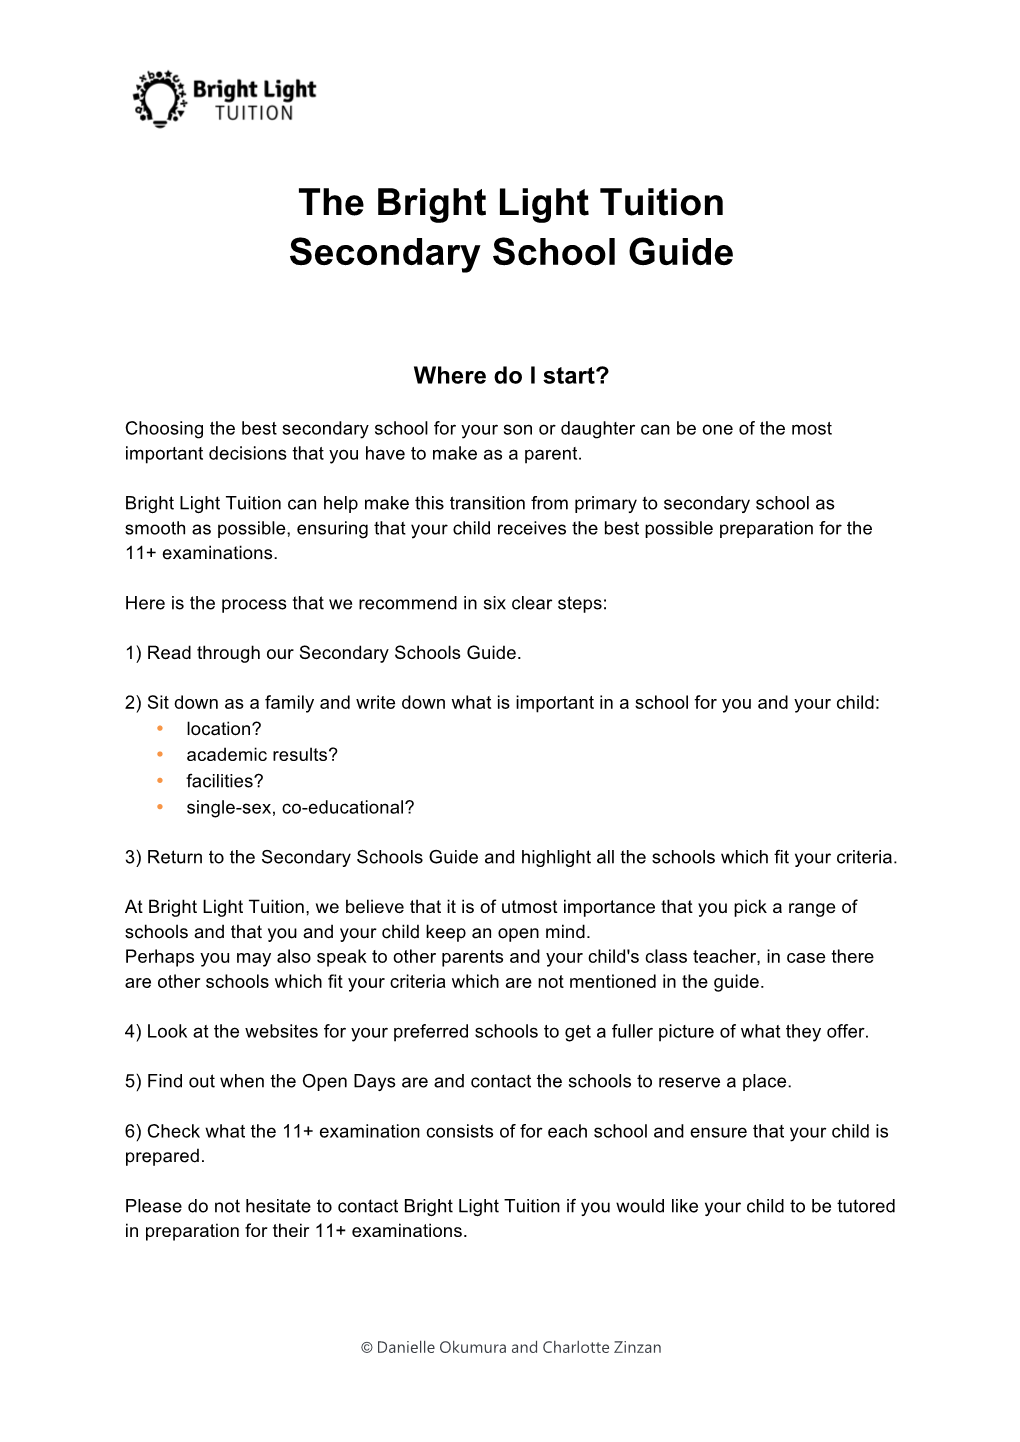 The Bright Light Tuition Secondary School Guide